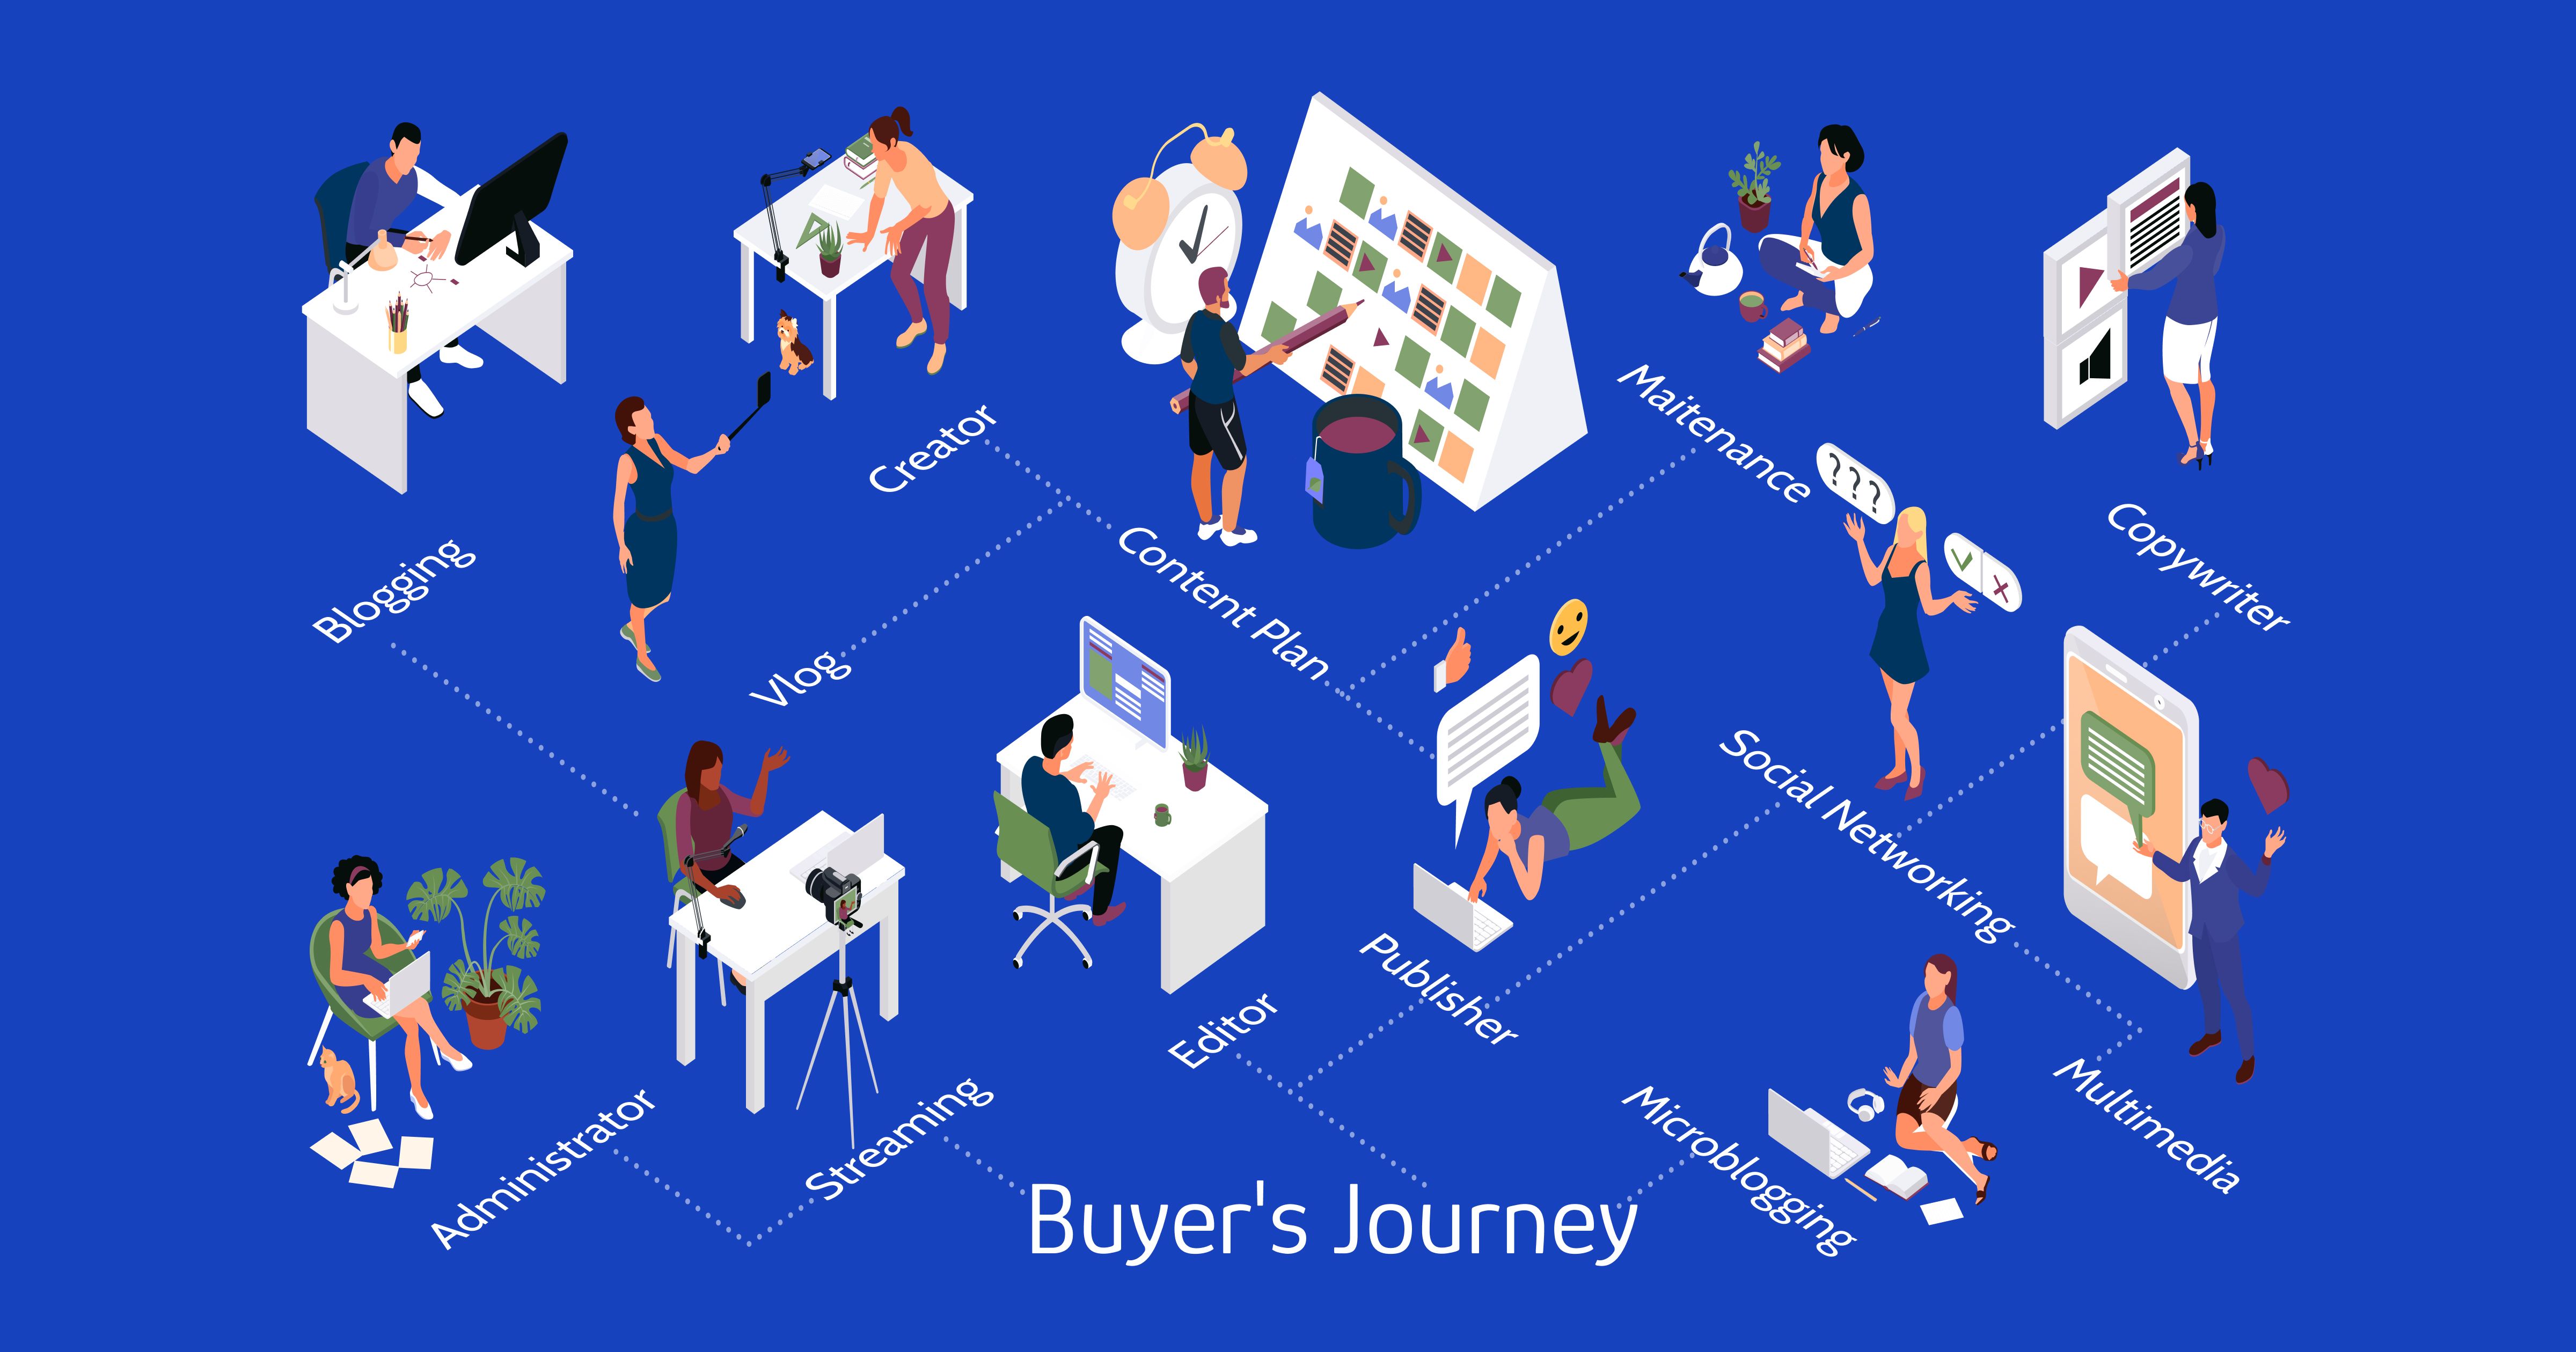 How to Create Content for Every Stage of the Buyer's Journey